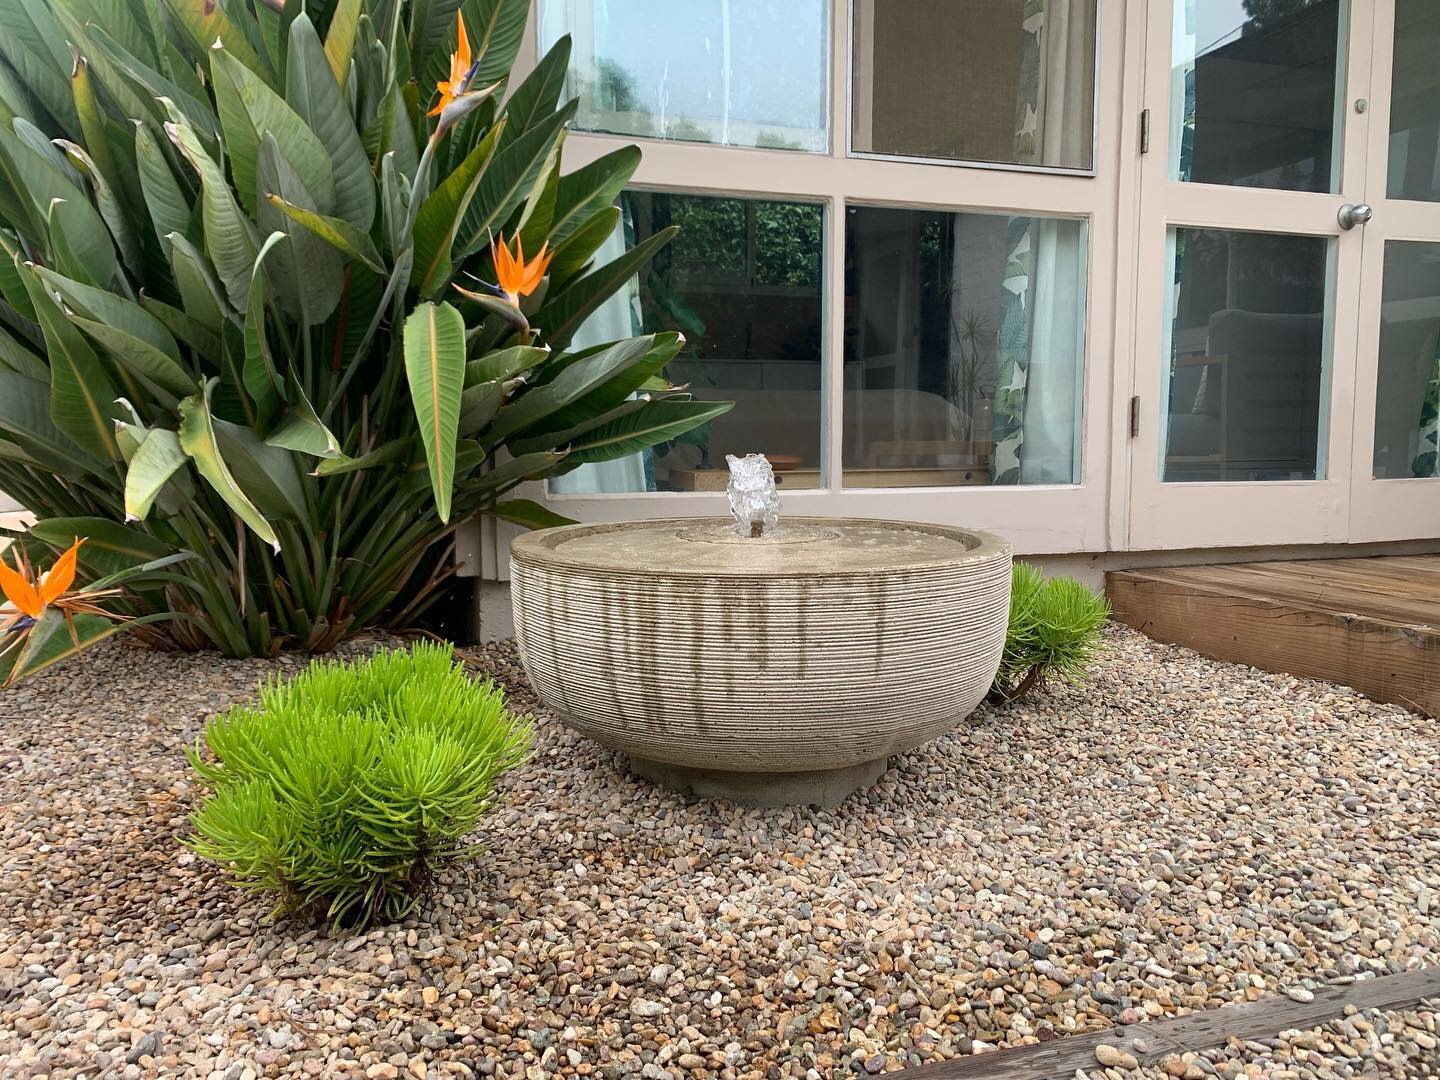 It&rsquo;s easier than ever to create a peaceful zen space for your home. Come and check out our options to find a customized fit for your space and style! #paradisefountains #fountain #fountains #oc #orangecounty #ie #inlandempire #garden #homeimpro